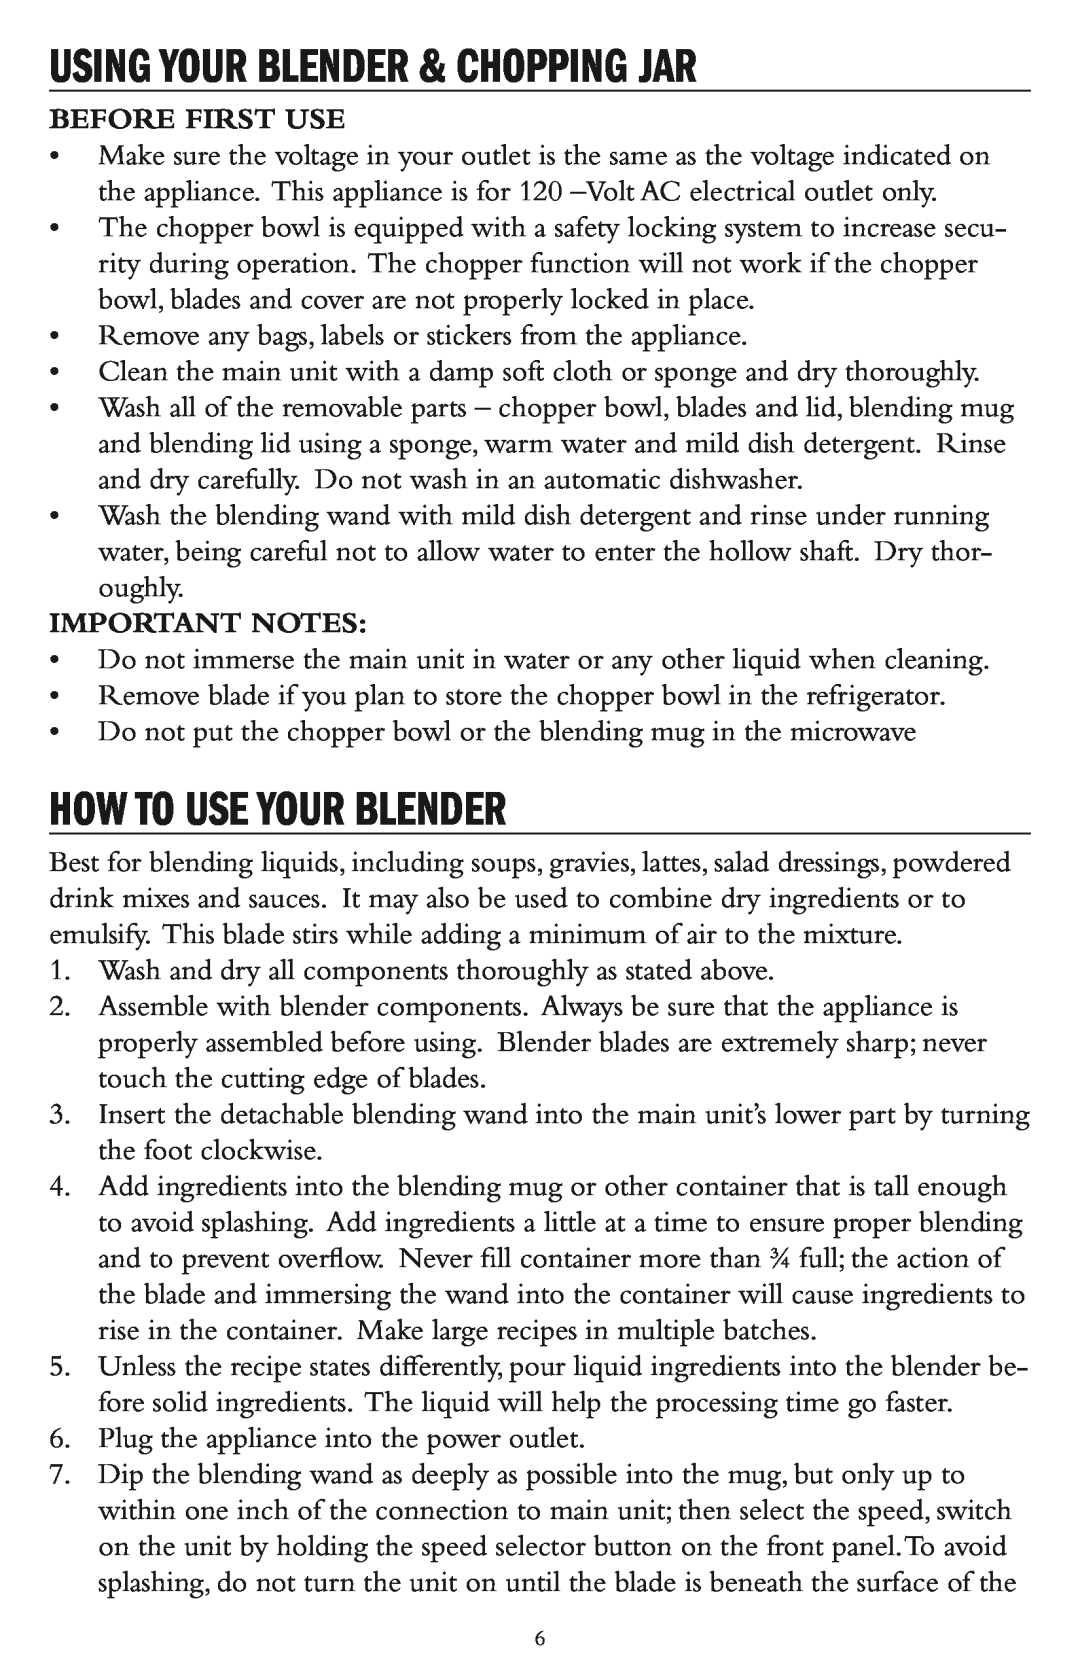 Taylor AB-1001-BL Using Your Blender & Chopping Jar, How To Use Your Blender, Before First Use, Important Notes 